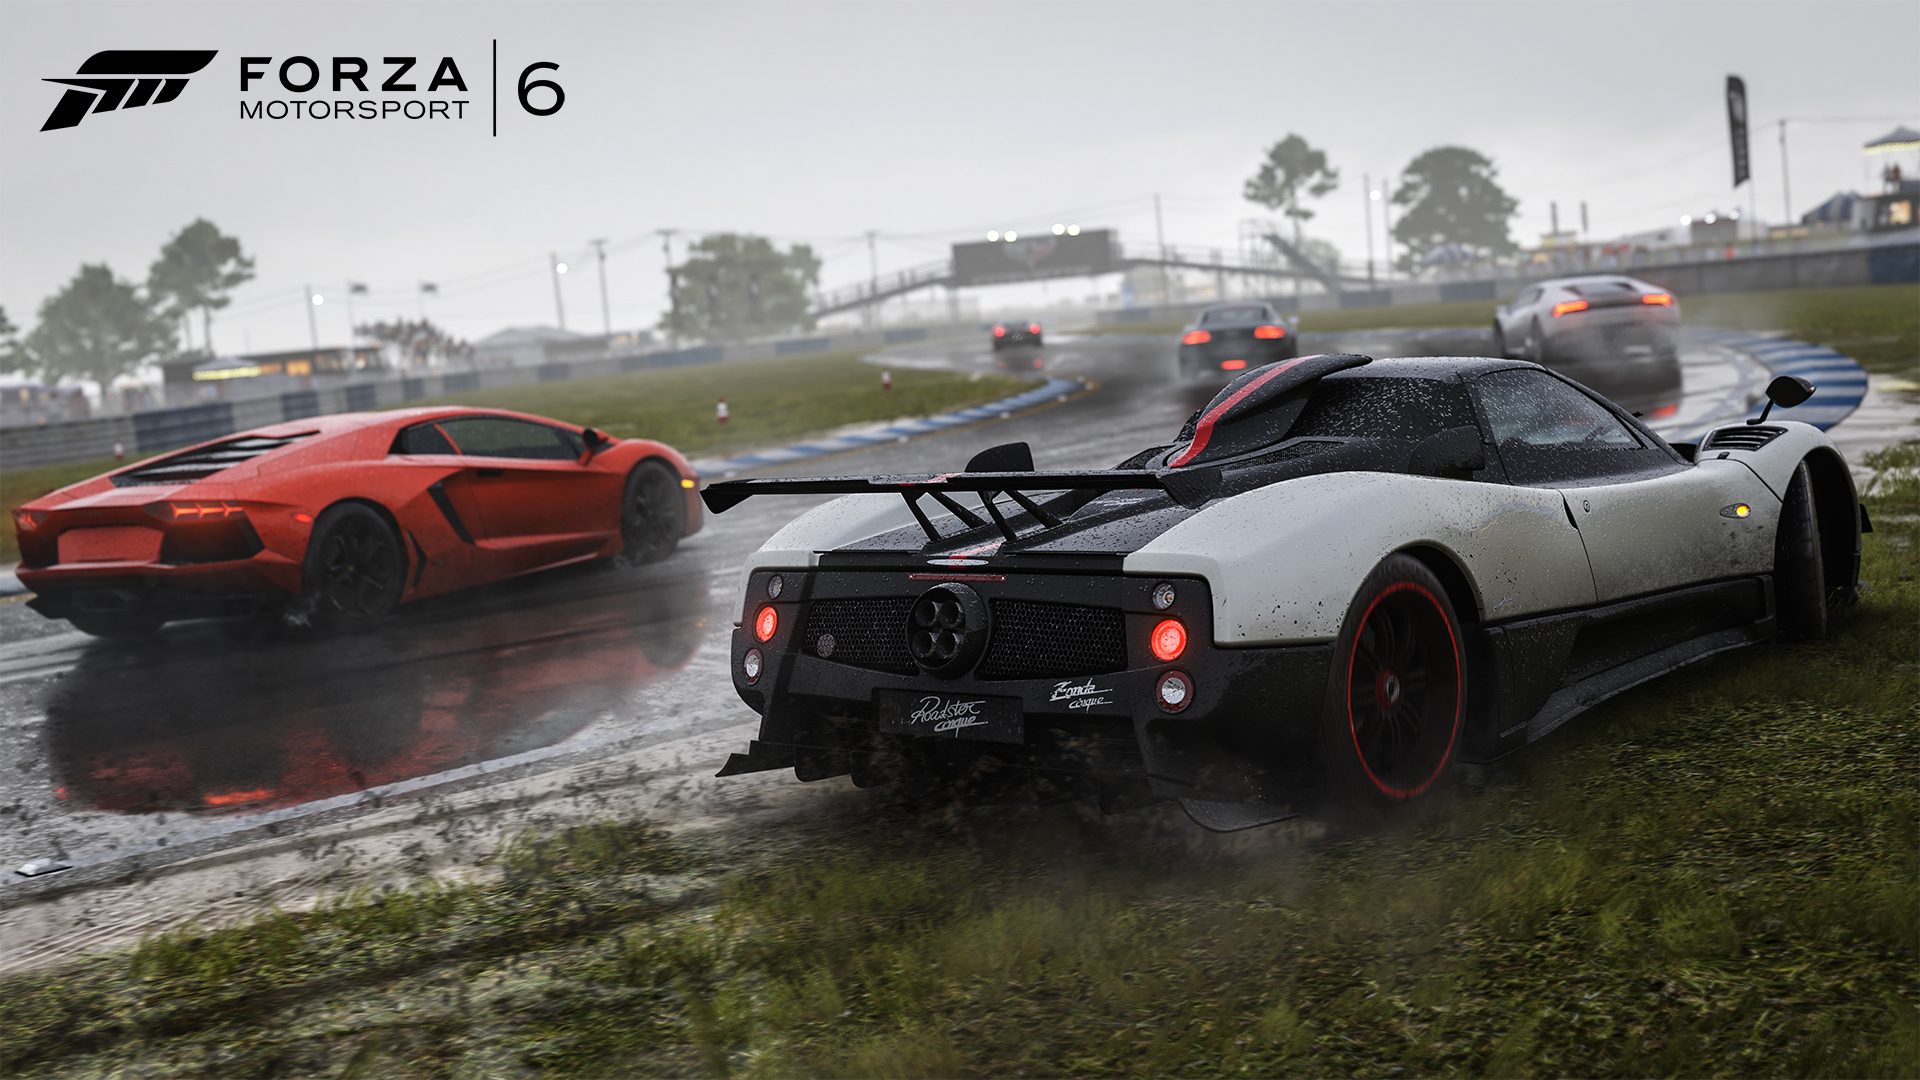 Forza Motorsport 6 Gets V8 Supercars and Awesome 1080p Screenshots